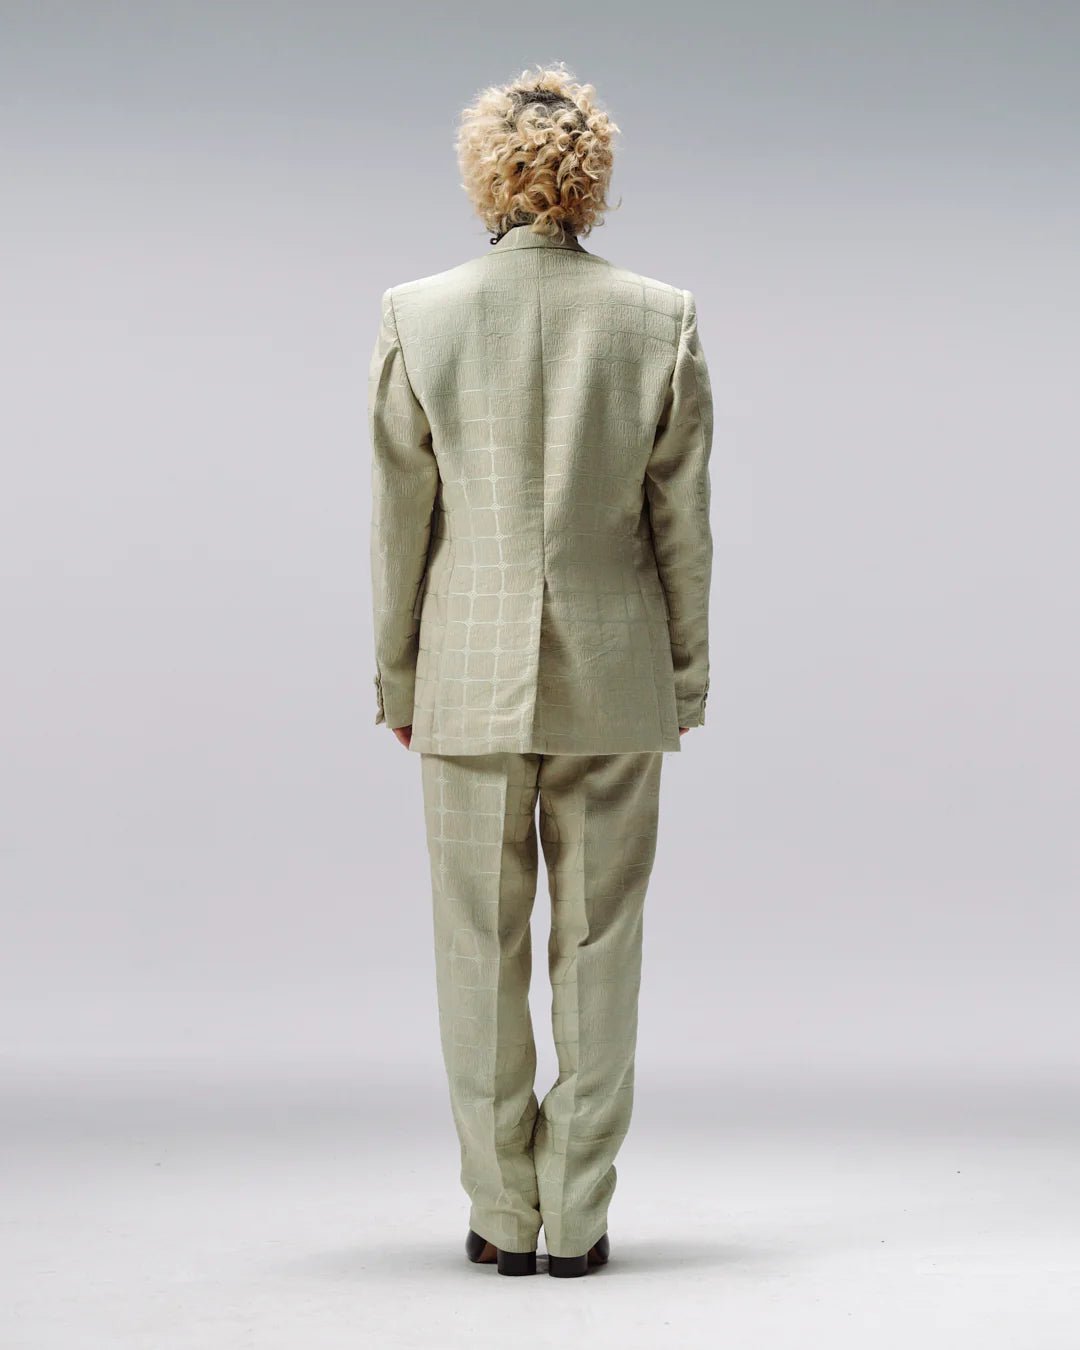 Unisex Business Unusual Suit — Vintage Mint by Emeka at White Label Project